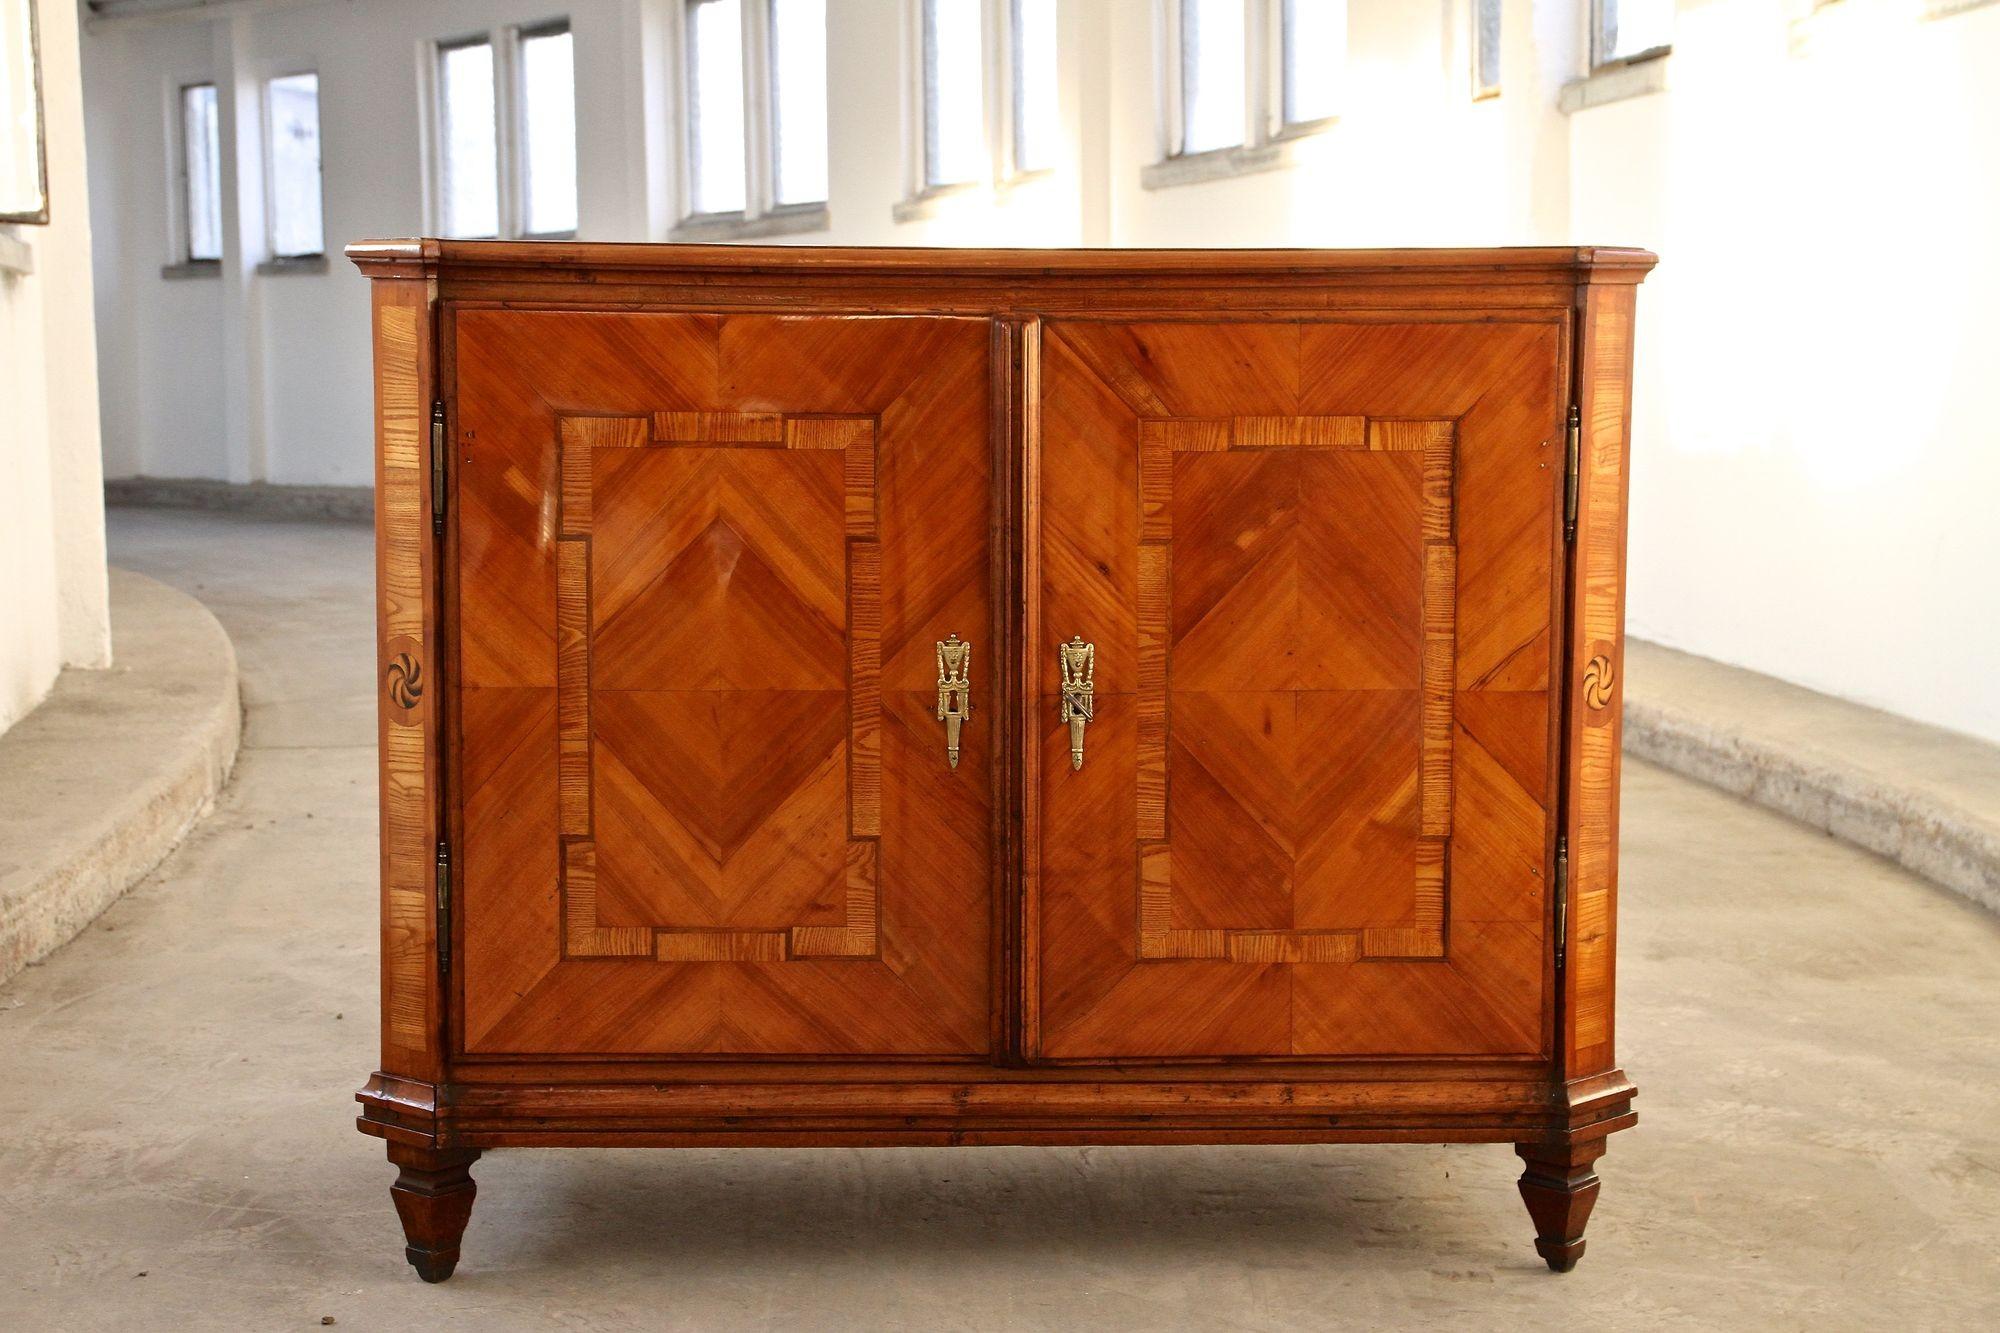 Breathtaking inlayed 18th century cherrywood half cabinet or sideboard from the so-called 